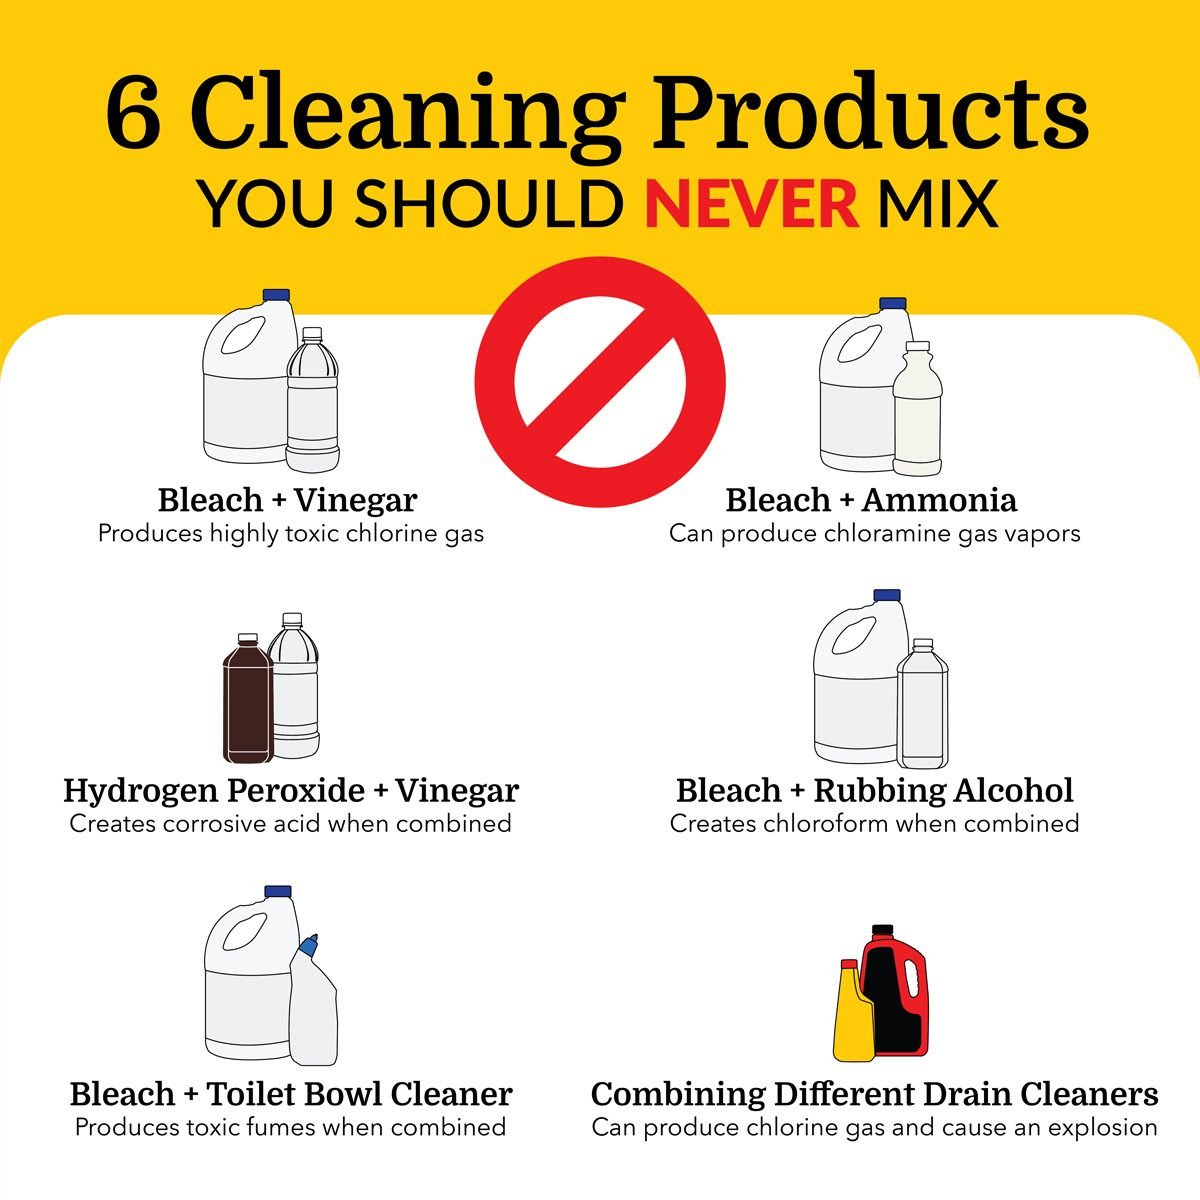 https://www.familyhandyman.com/wp-content/uploads/2020/03/Cleaning-Products2-01.jpg?fit=700%2C700